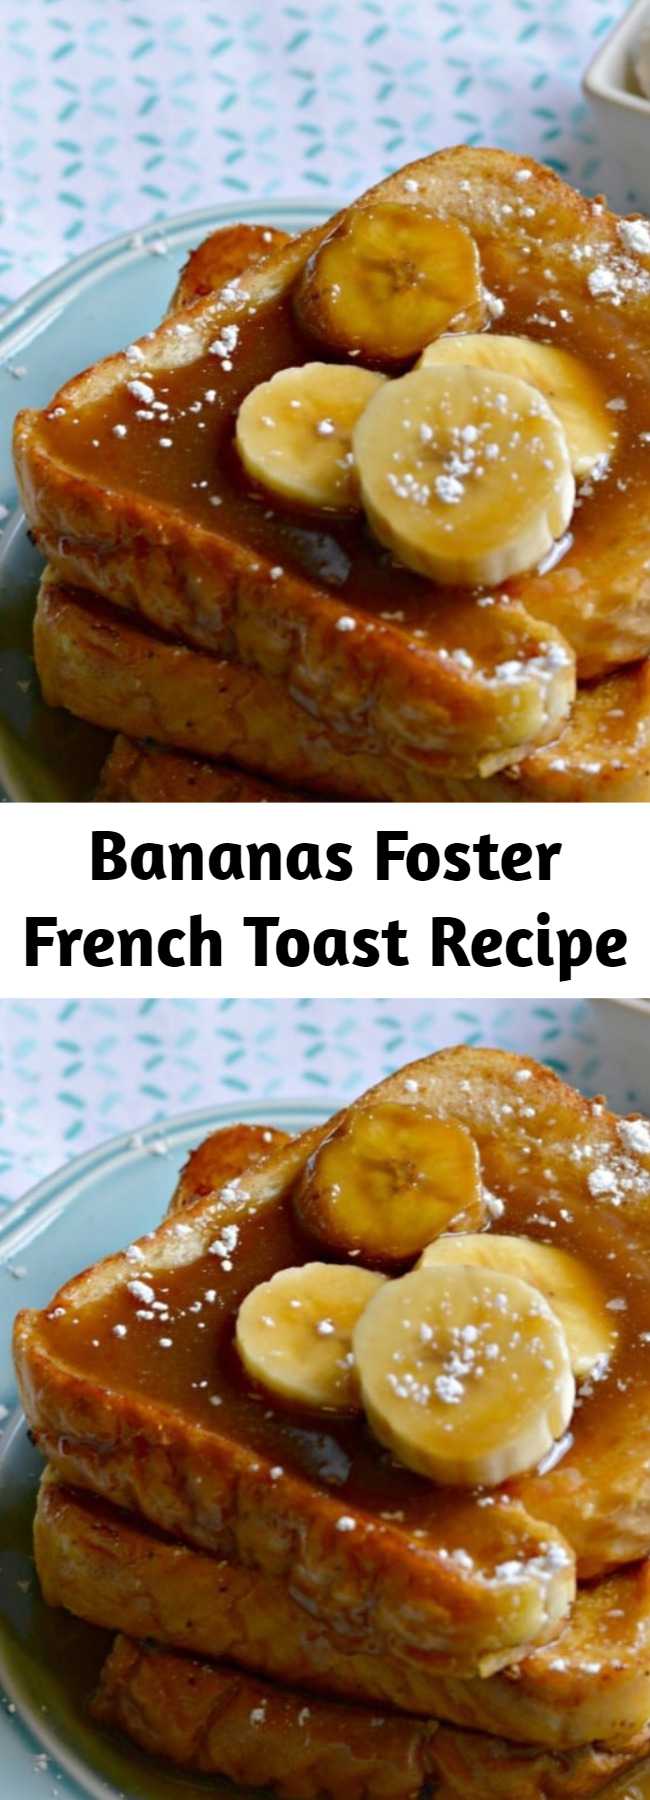 Bananas Foster French Toast Recipe - Bananas Foster French Toast is a perfect recipe for any occasion. The flavors are unbeatable and everyone will love it.